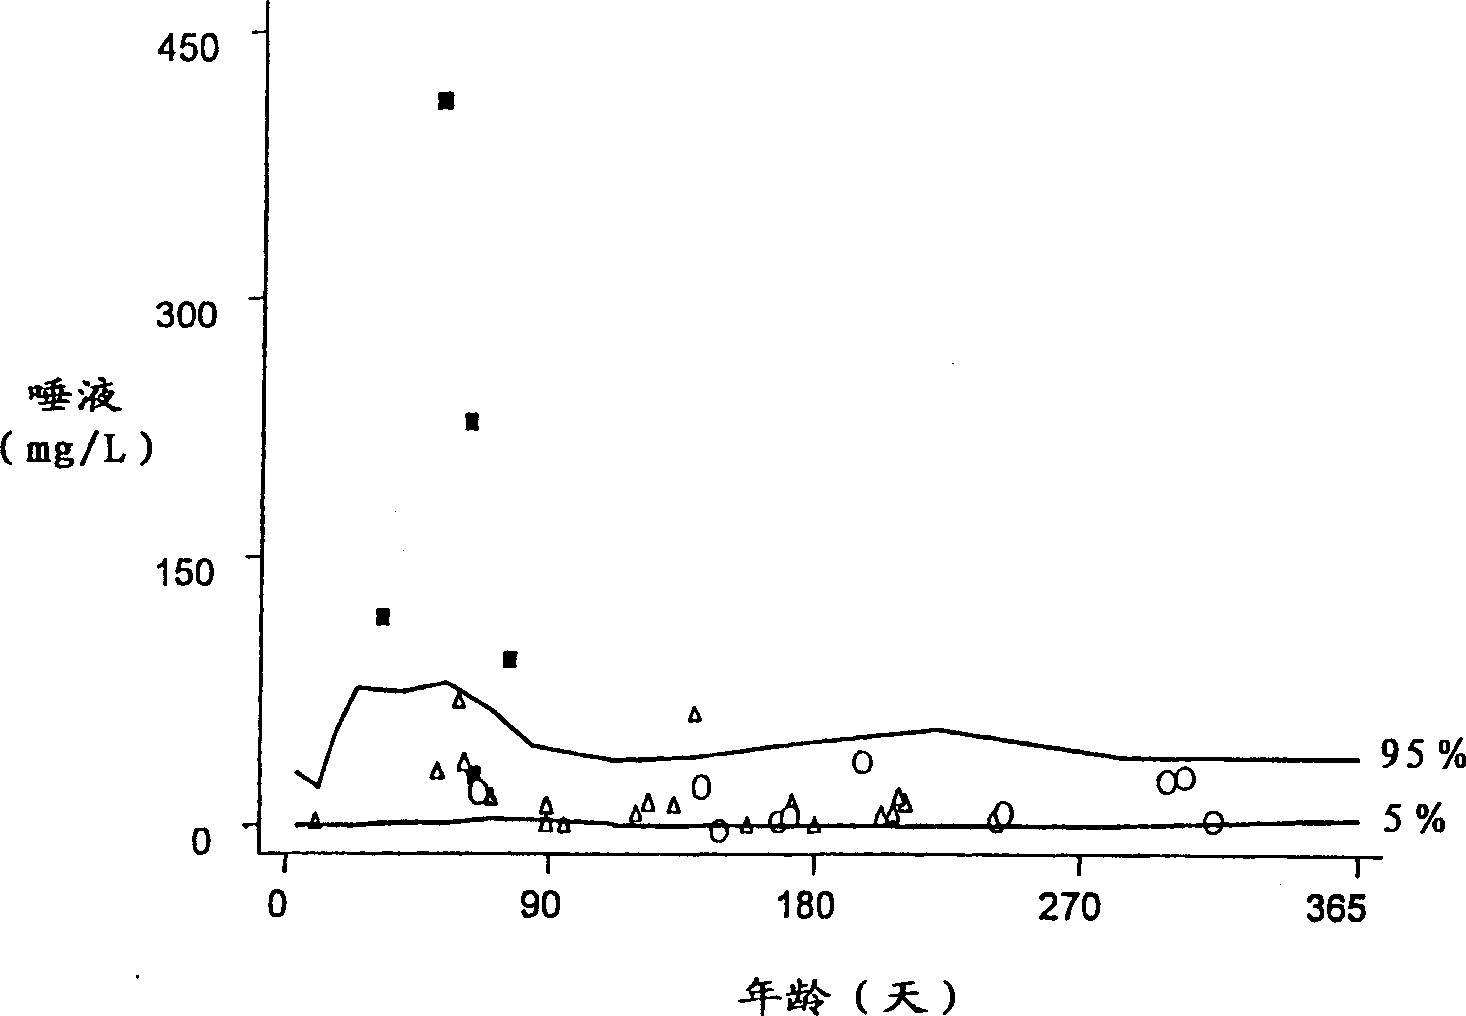 Method of determining potential susceptibility to development of ALTE and/or SIDS